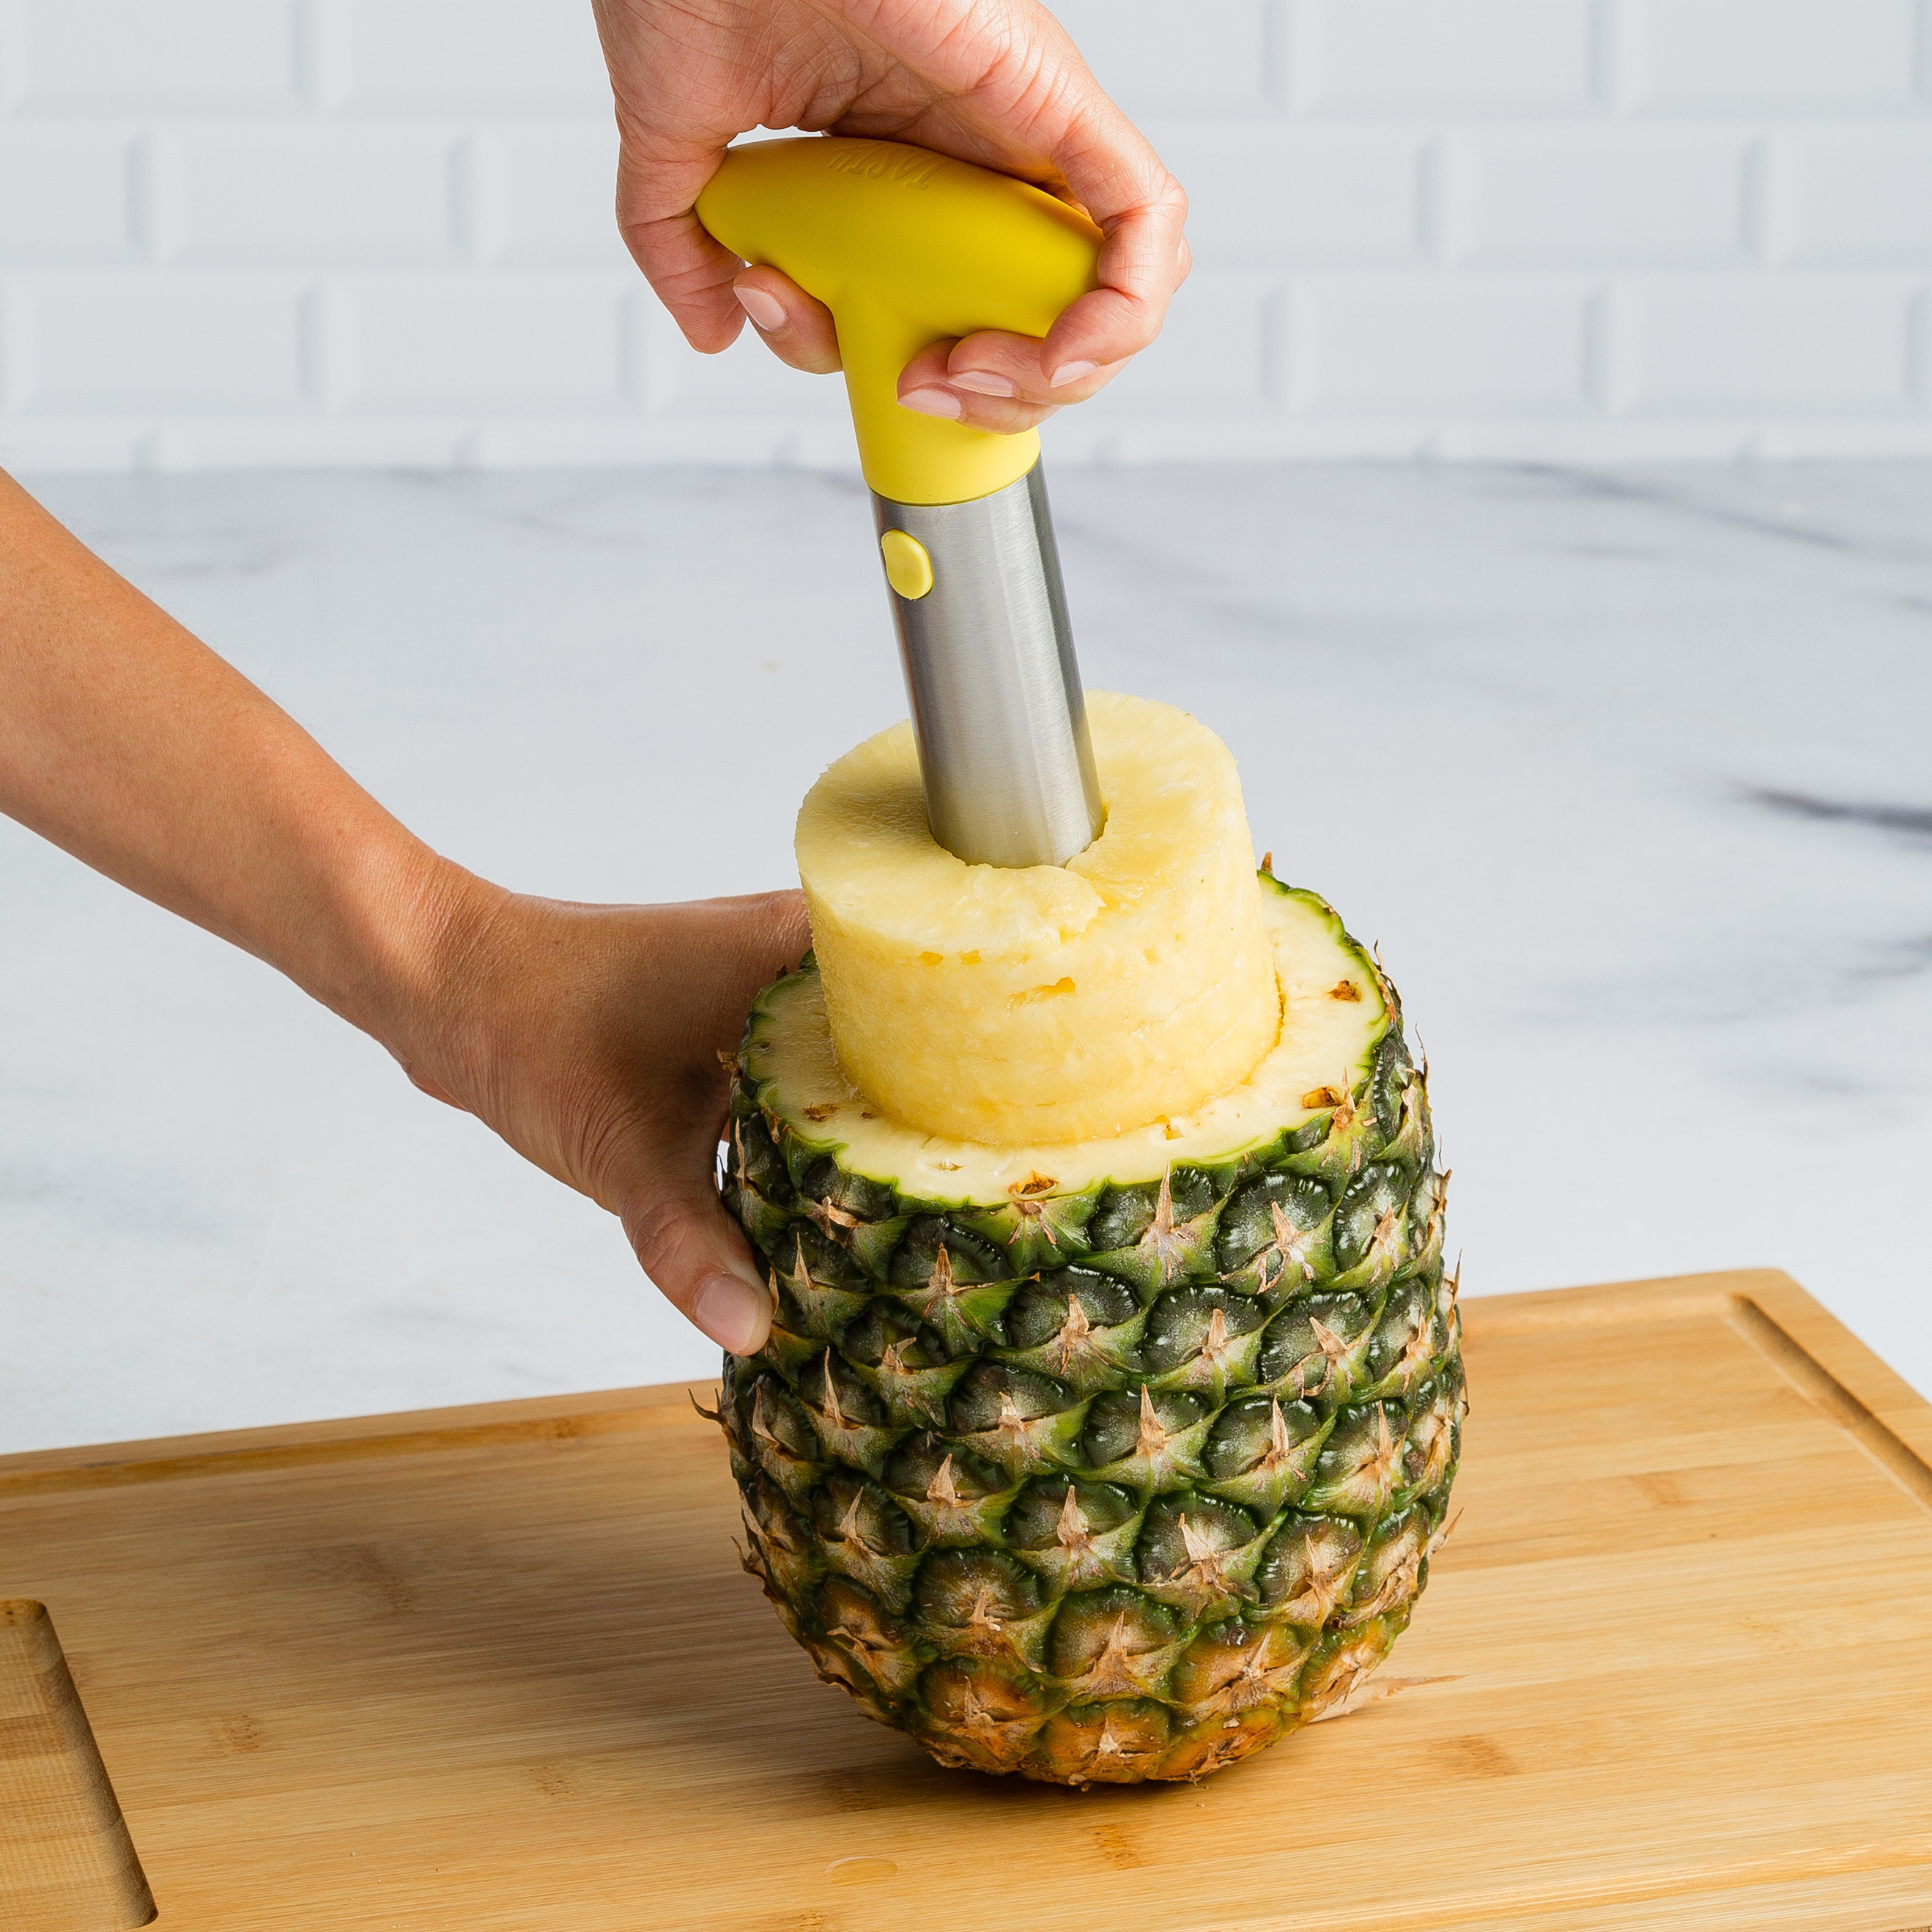 Model holding a pineapple corer and removing the inside of a pineapple